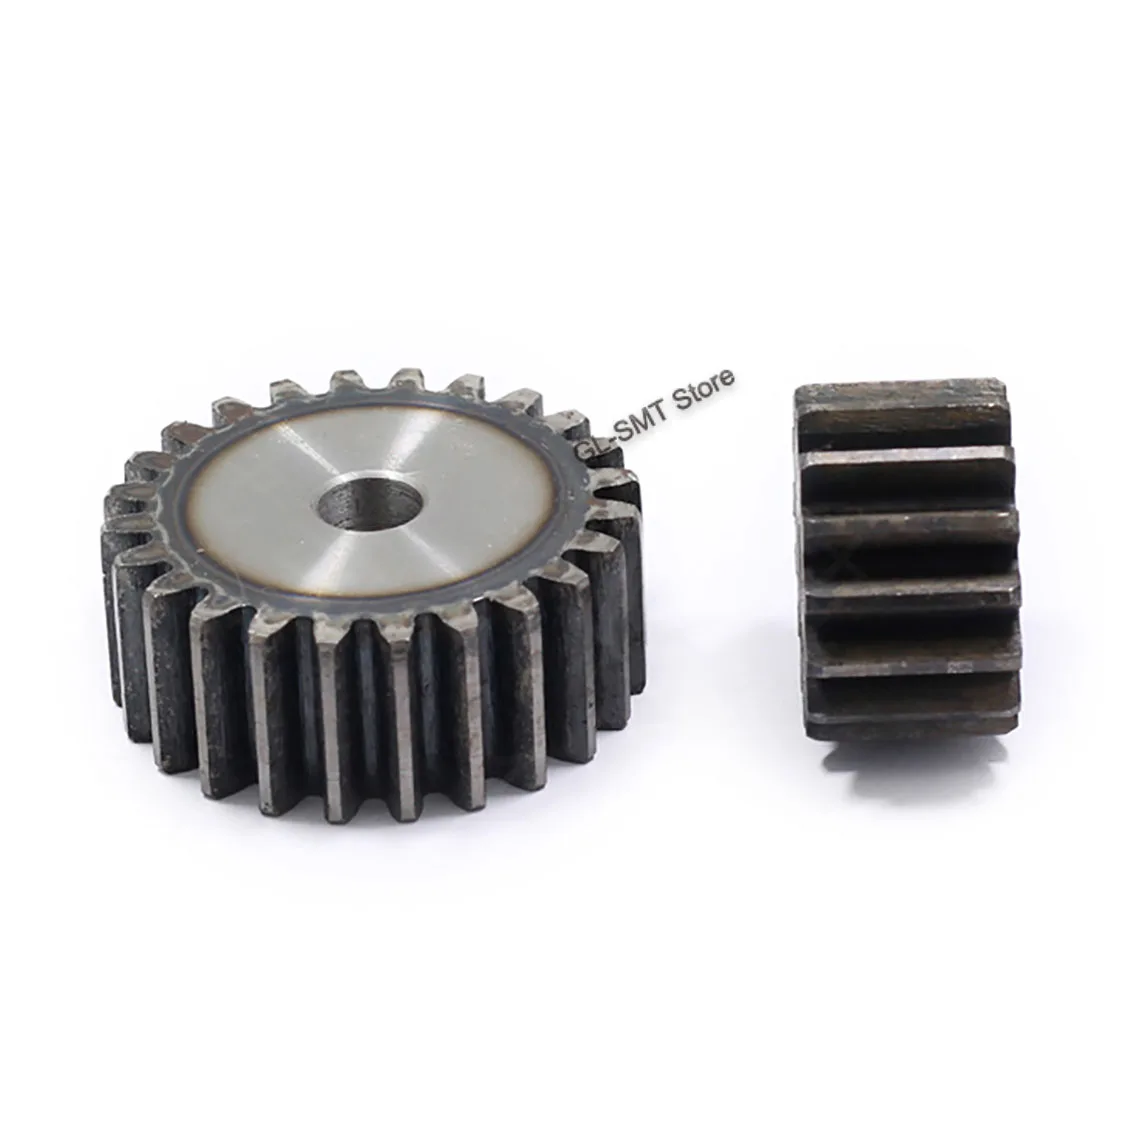 

1Pcs 58-61 Tooth Module 2 Spur Gear Thick 20mm 45# Carbon Steel Metal Transmission Pinion Gear Process Hole 12/15/16mm